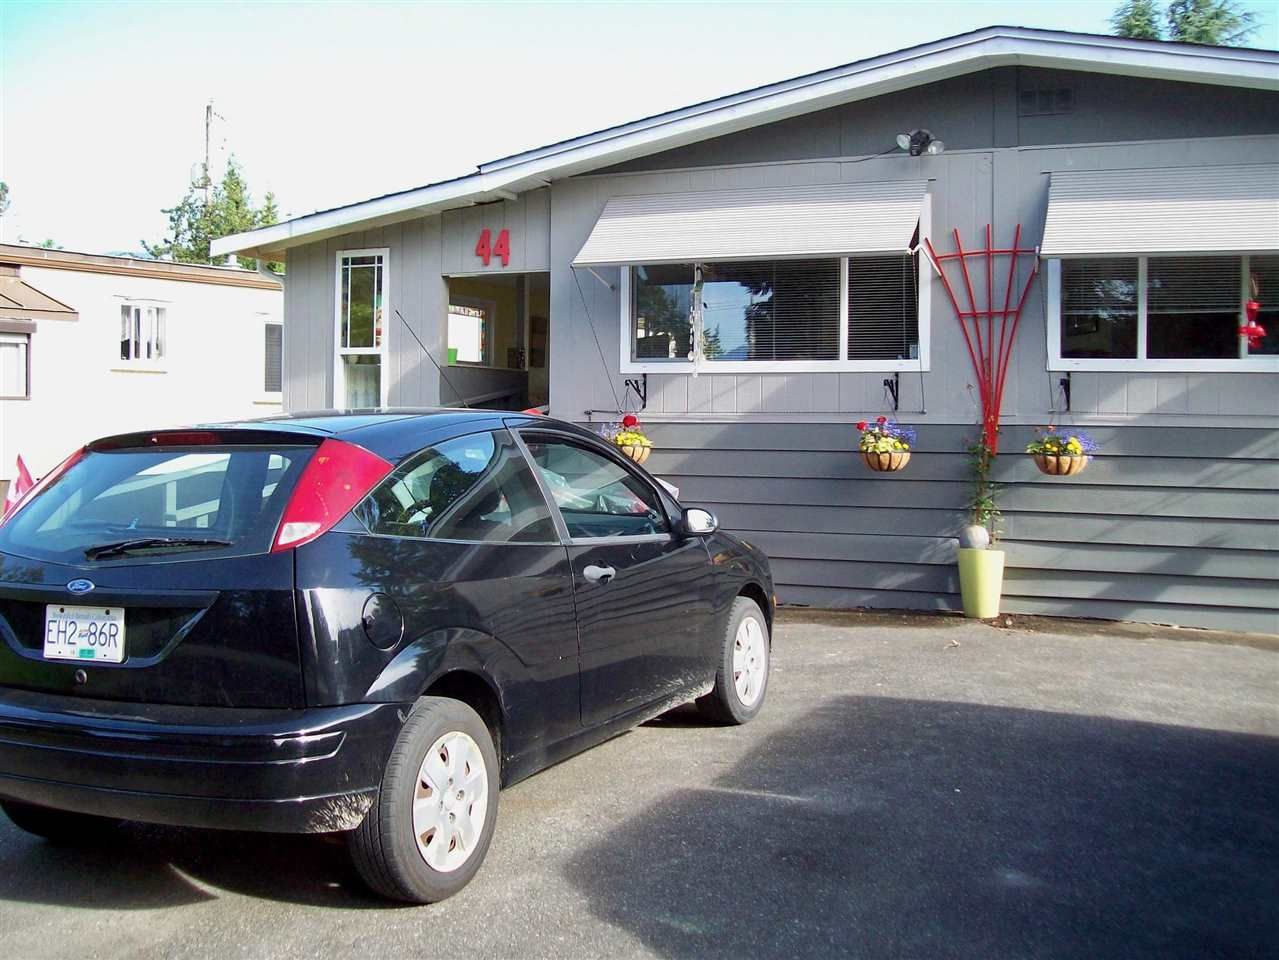 I have sold a property at 44 45111 WOLFE RD in Chilliwack
